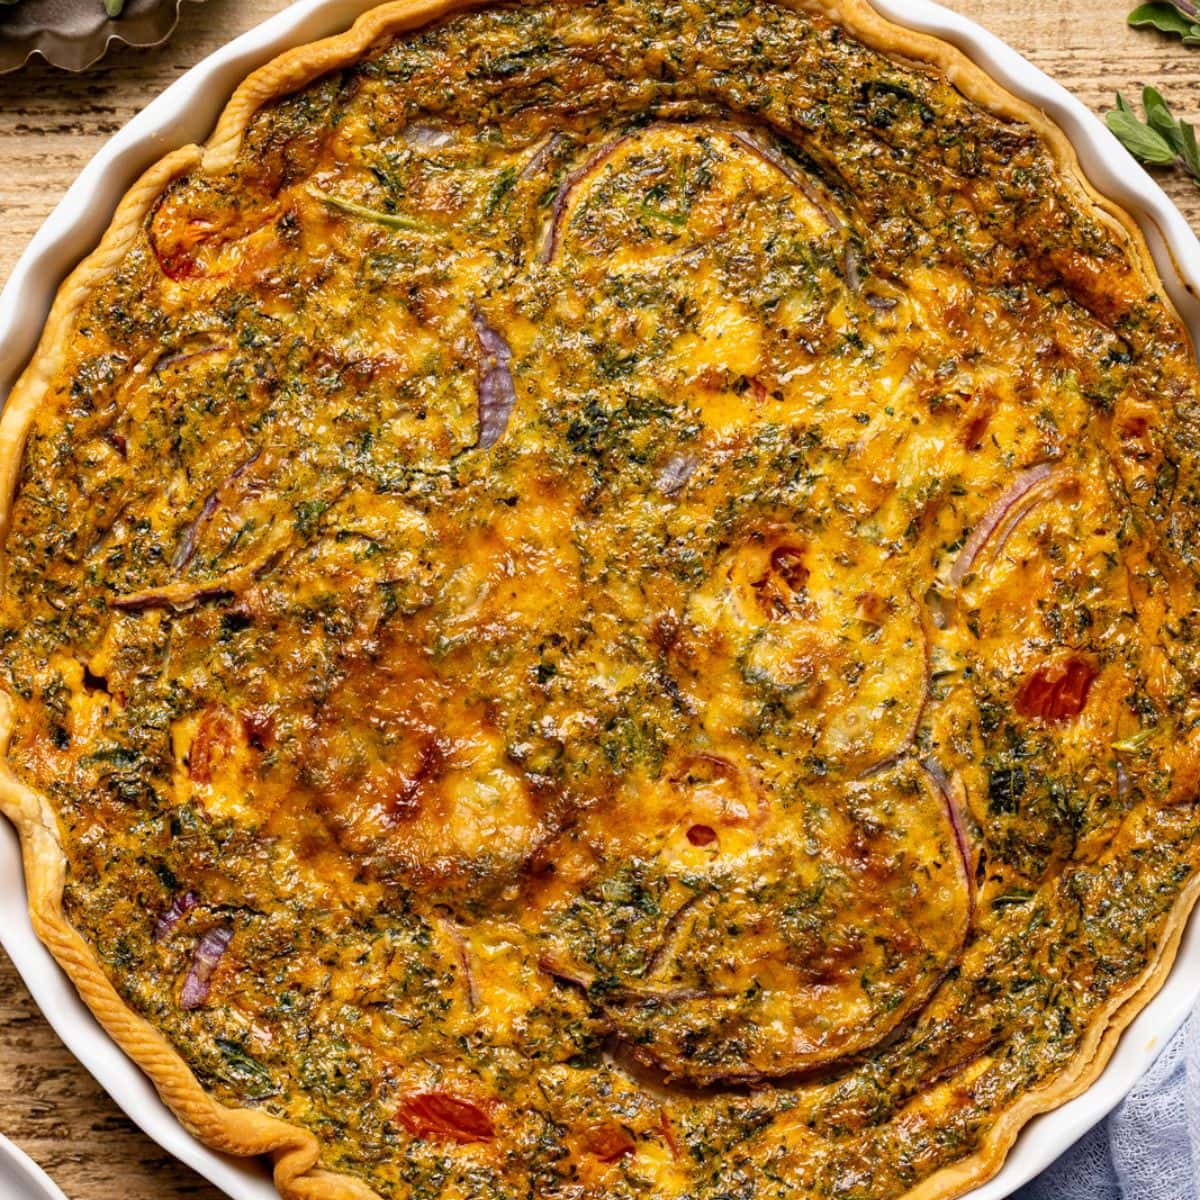 Up close shot of quiche in a baking dish on brown wood table with herbs + seasonings.